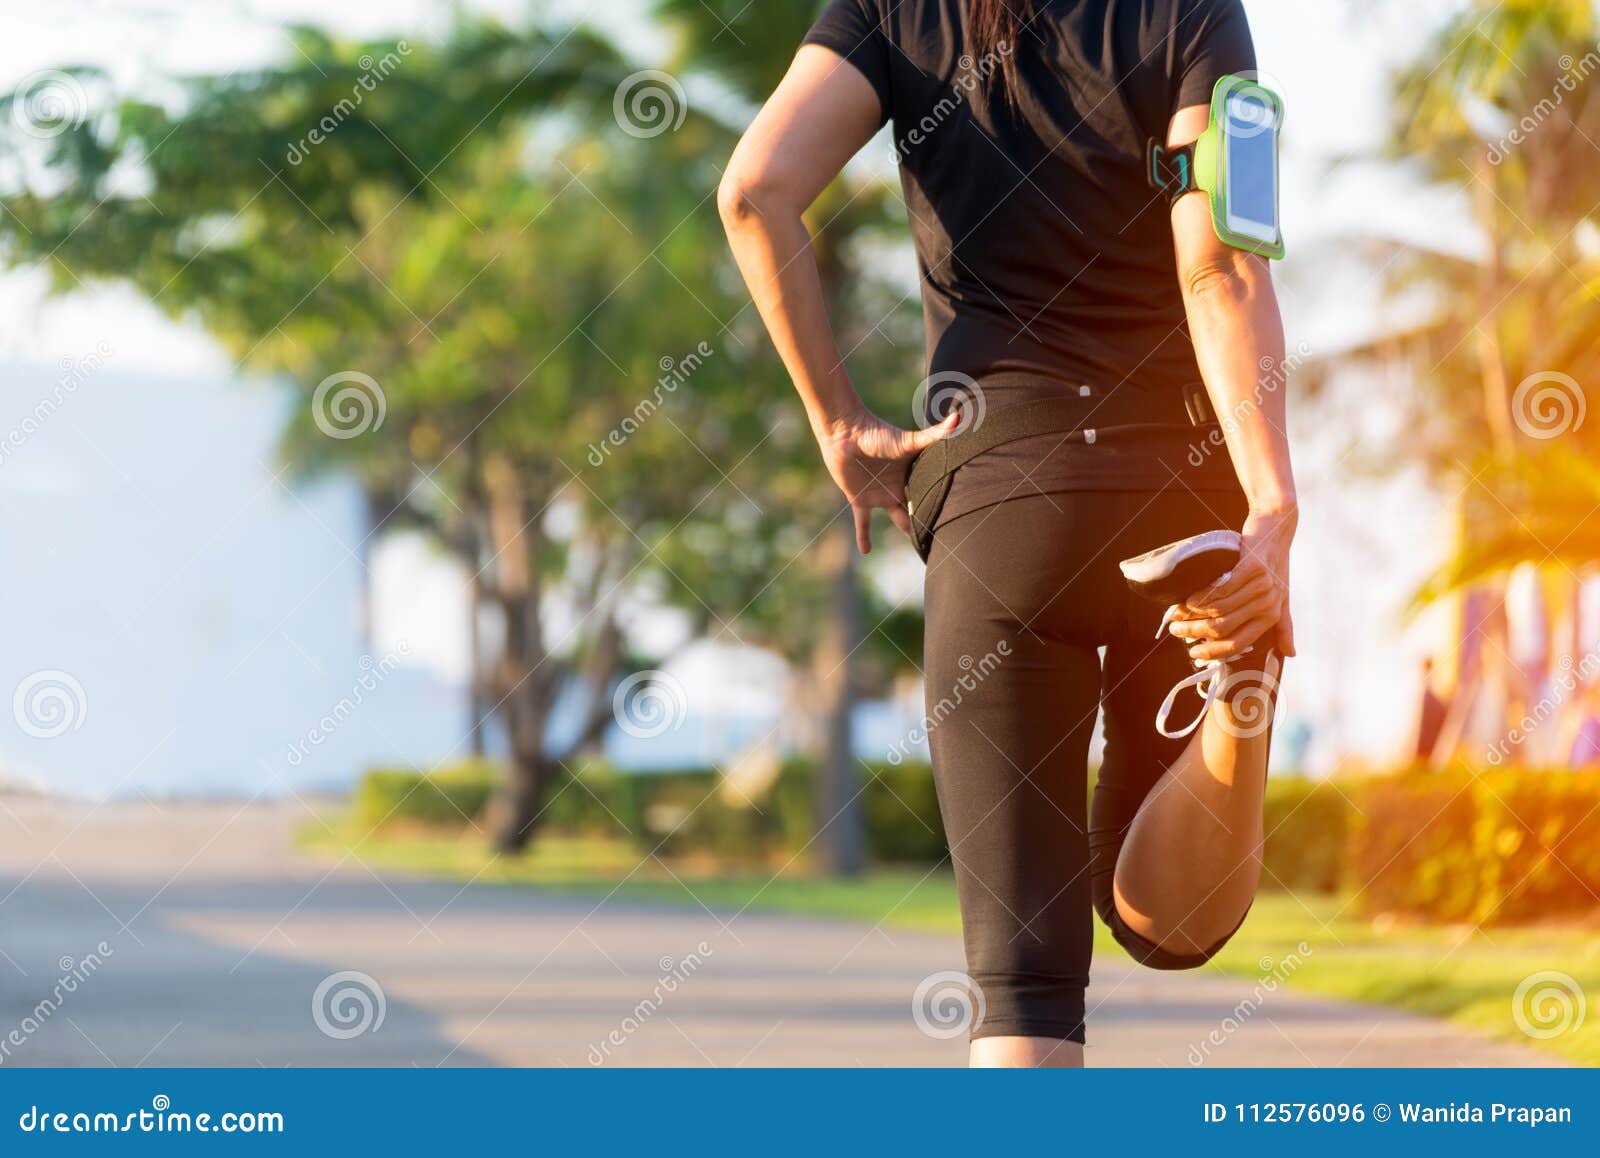 healthy life. asian fitness woman runner stretching legs before run outdoor workout in the park.